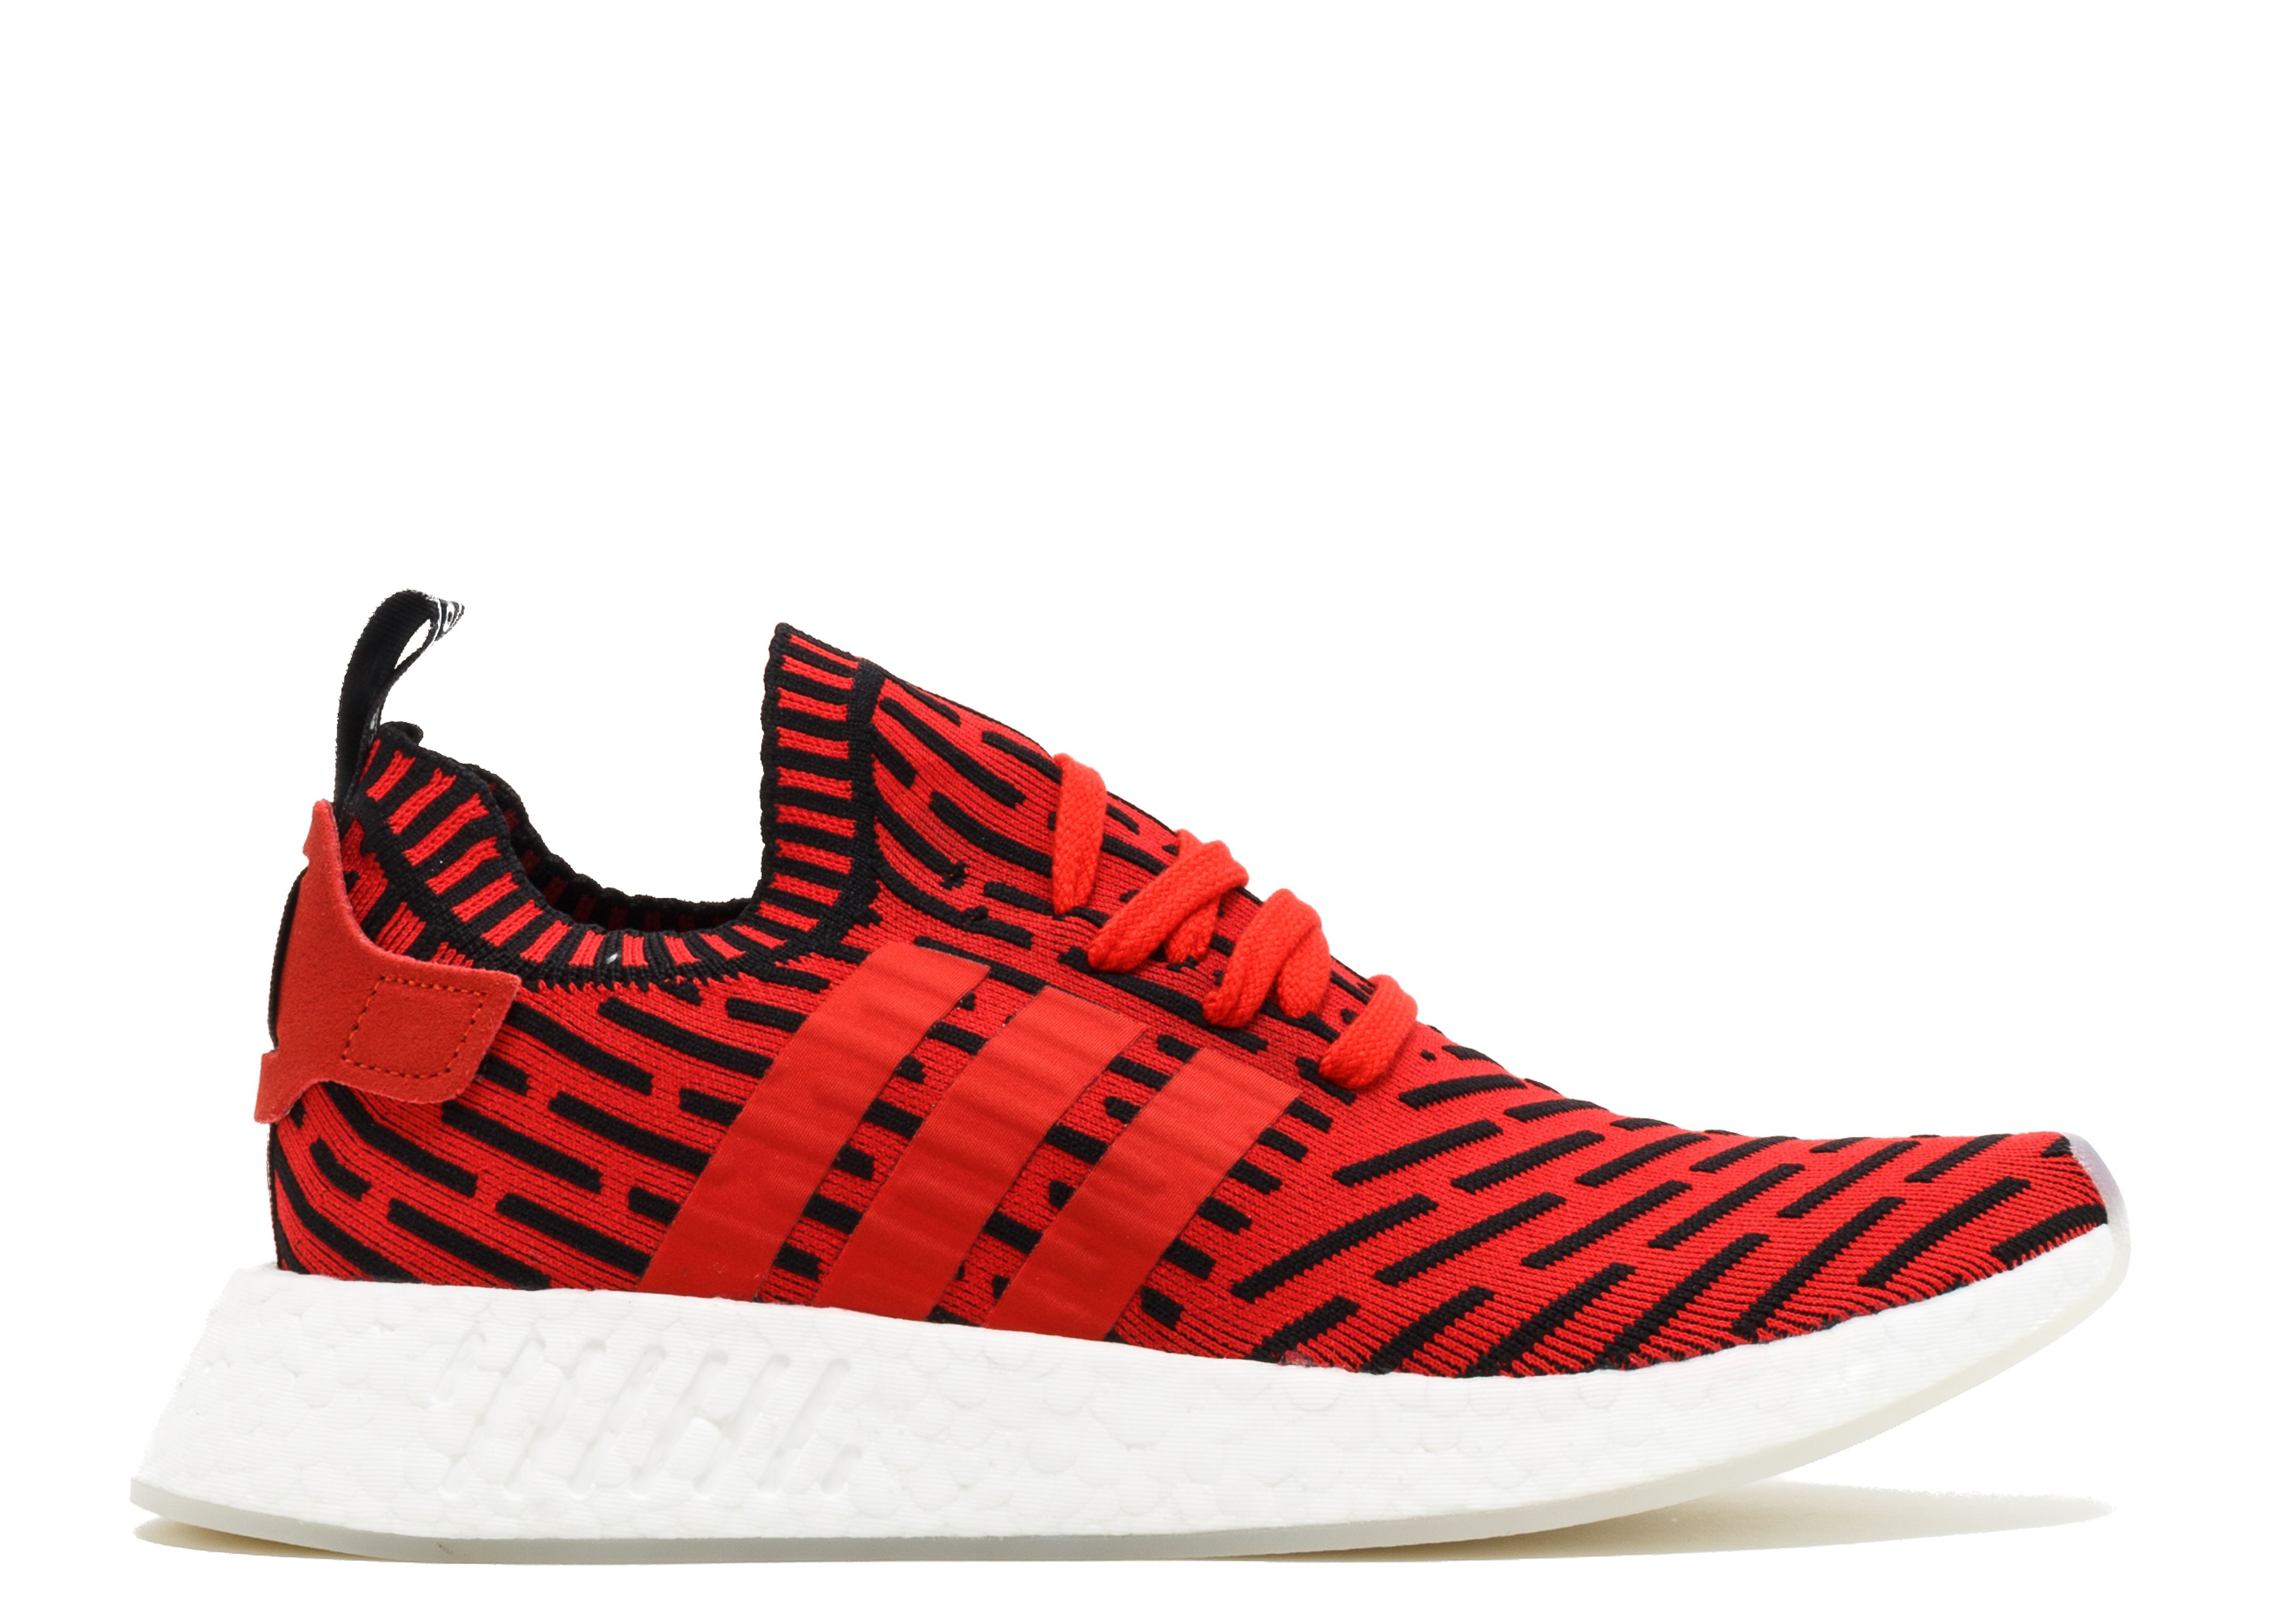 NMD_R2 PK 'Core Red' - Adidas - BB2910 - core red/core red/footwear white |  Flight Club